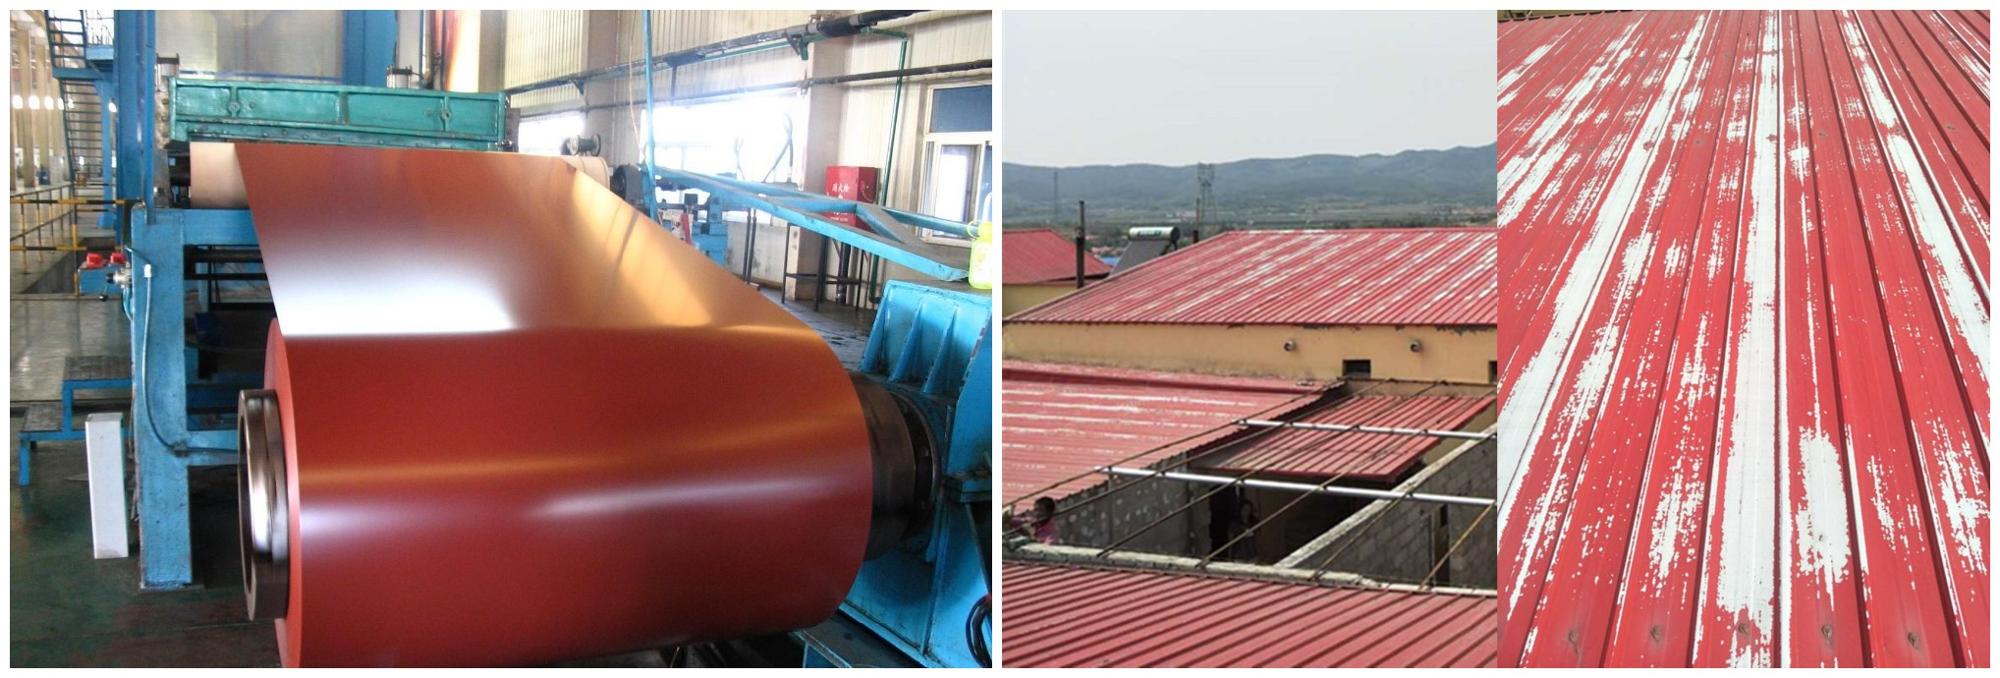 corrugated-roofing-steel-